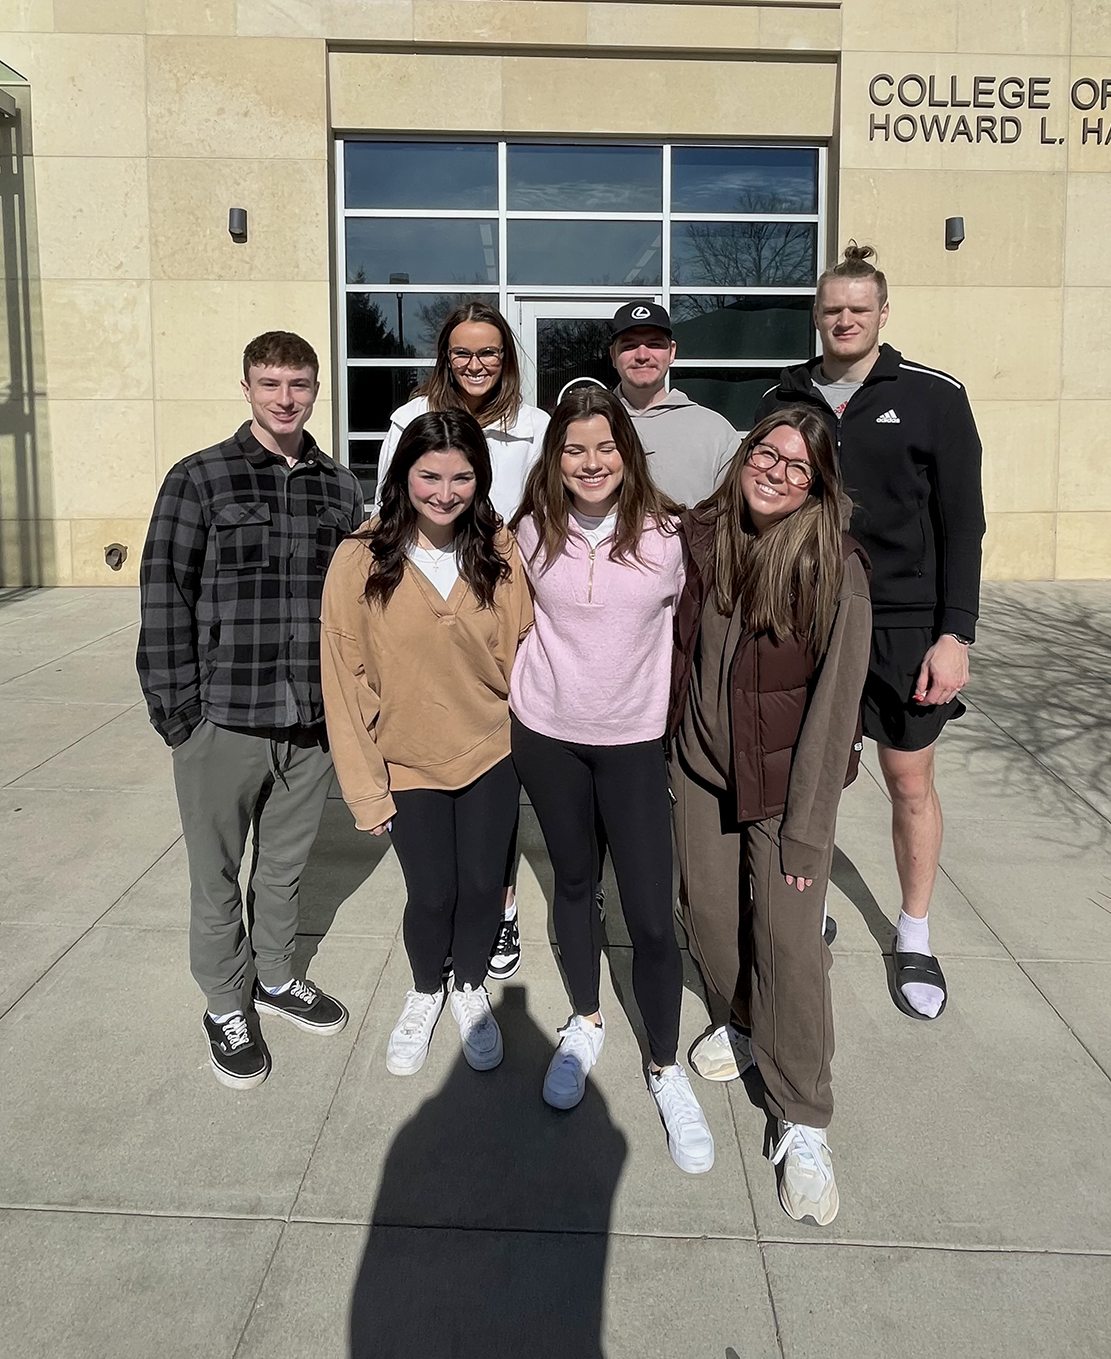 Public Relations team (back row, left to right) Hunter Olson, Isabelle Clemens, Derek Venner, Thomas Fidone (front row, left to right) Kate Trader, Sadie Richards, Emily Harris